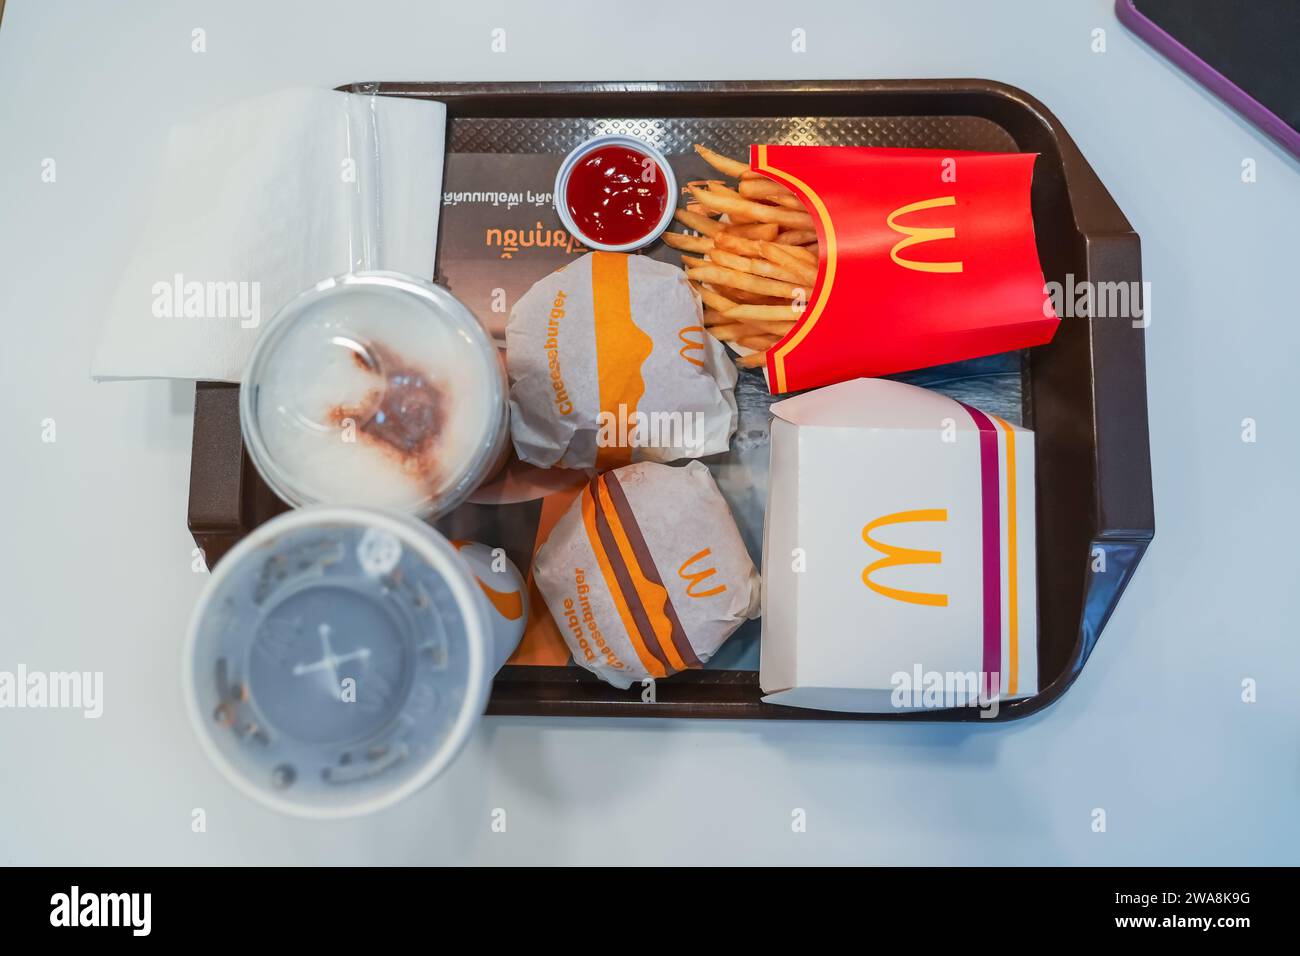 McDonald's is an American chesseburger and fast food restaurant chain. The McDonald's logo has branches around the world. Thailand, Bangkok 22 decembe Stock Photo